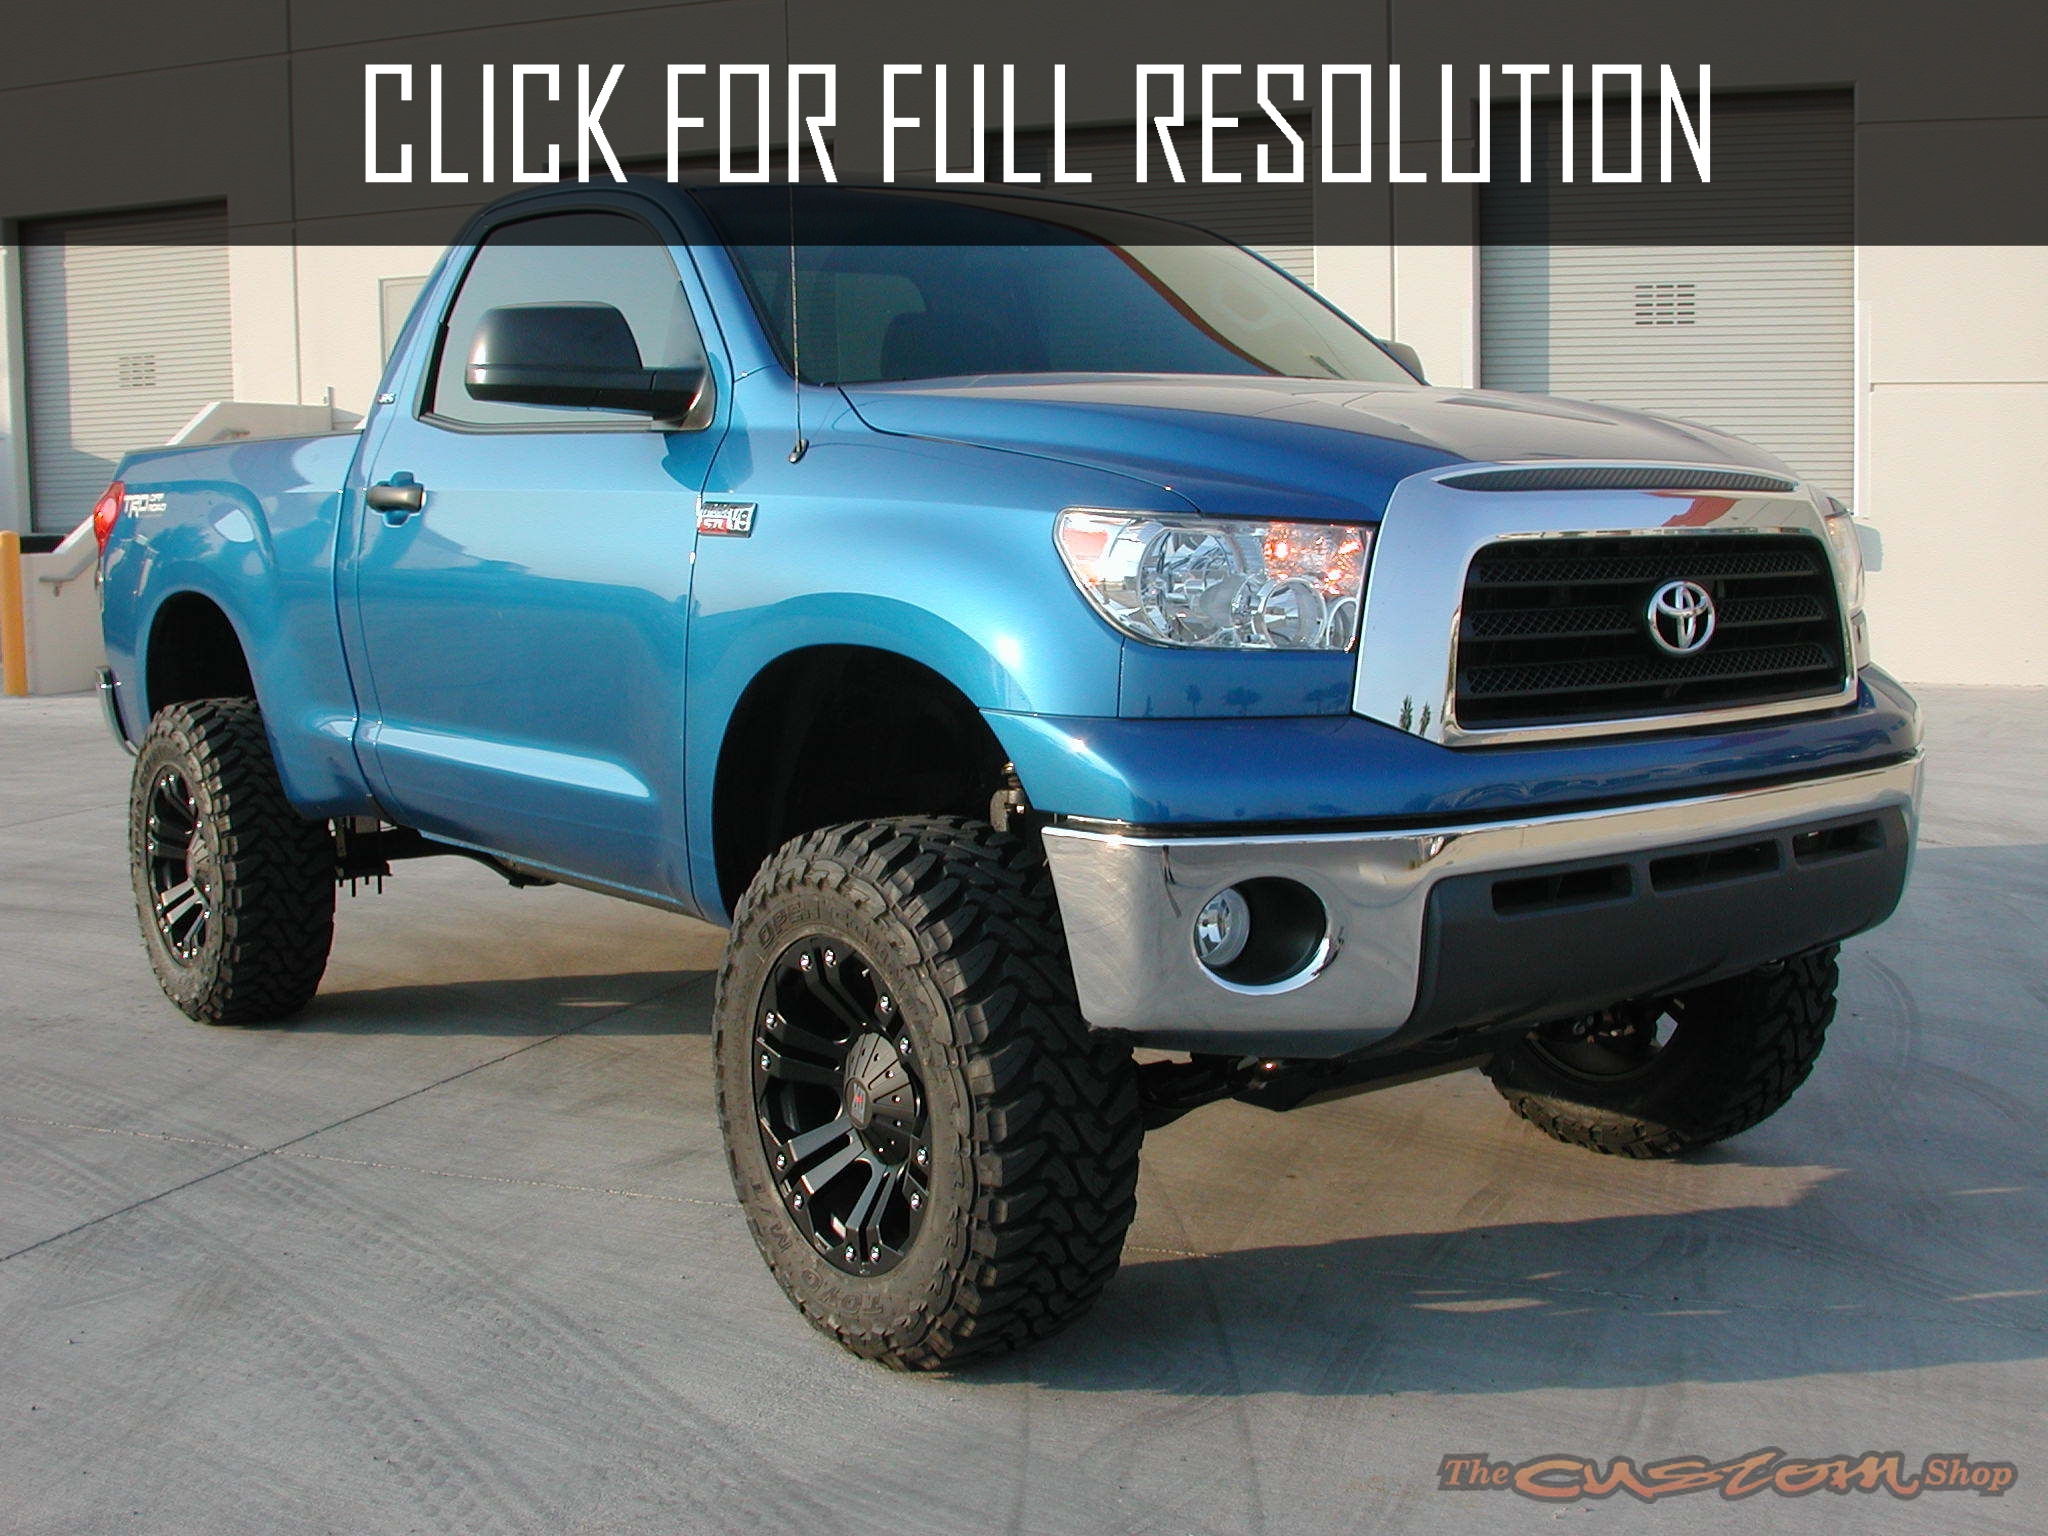 Toyota Tundra Single Cab - amazing photo gallery, some information and